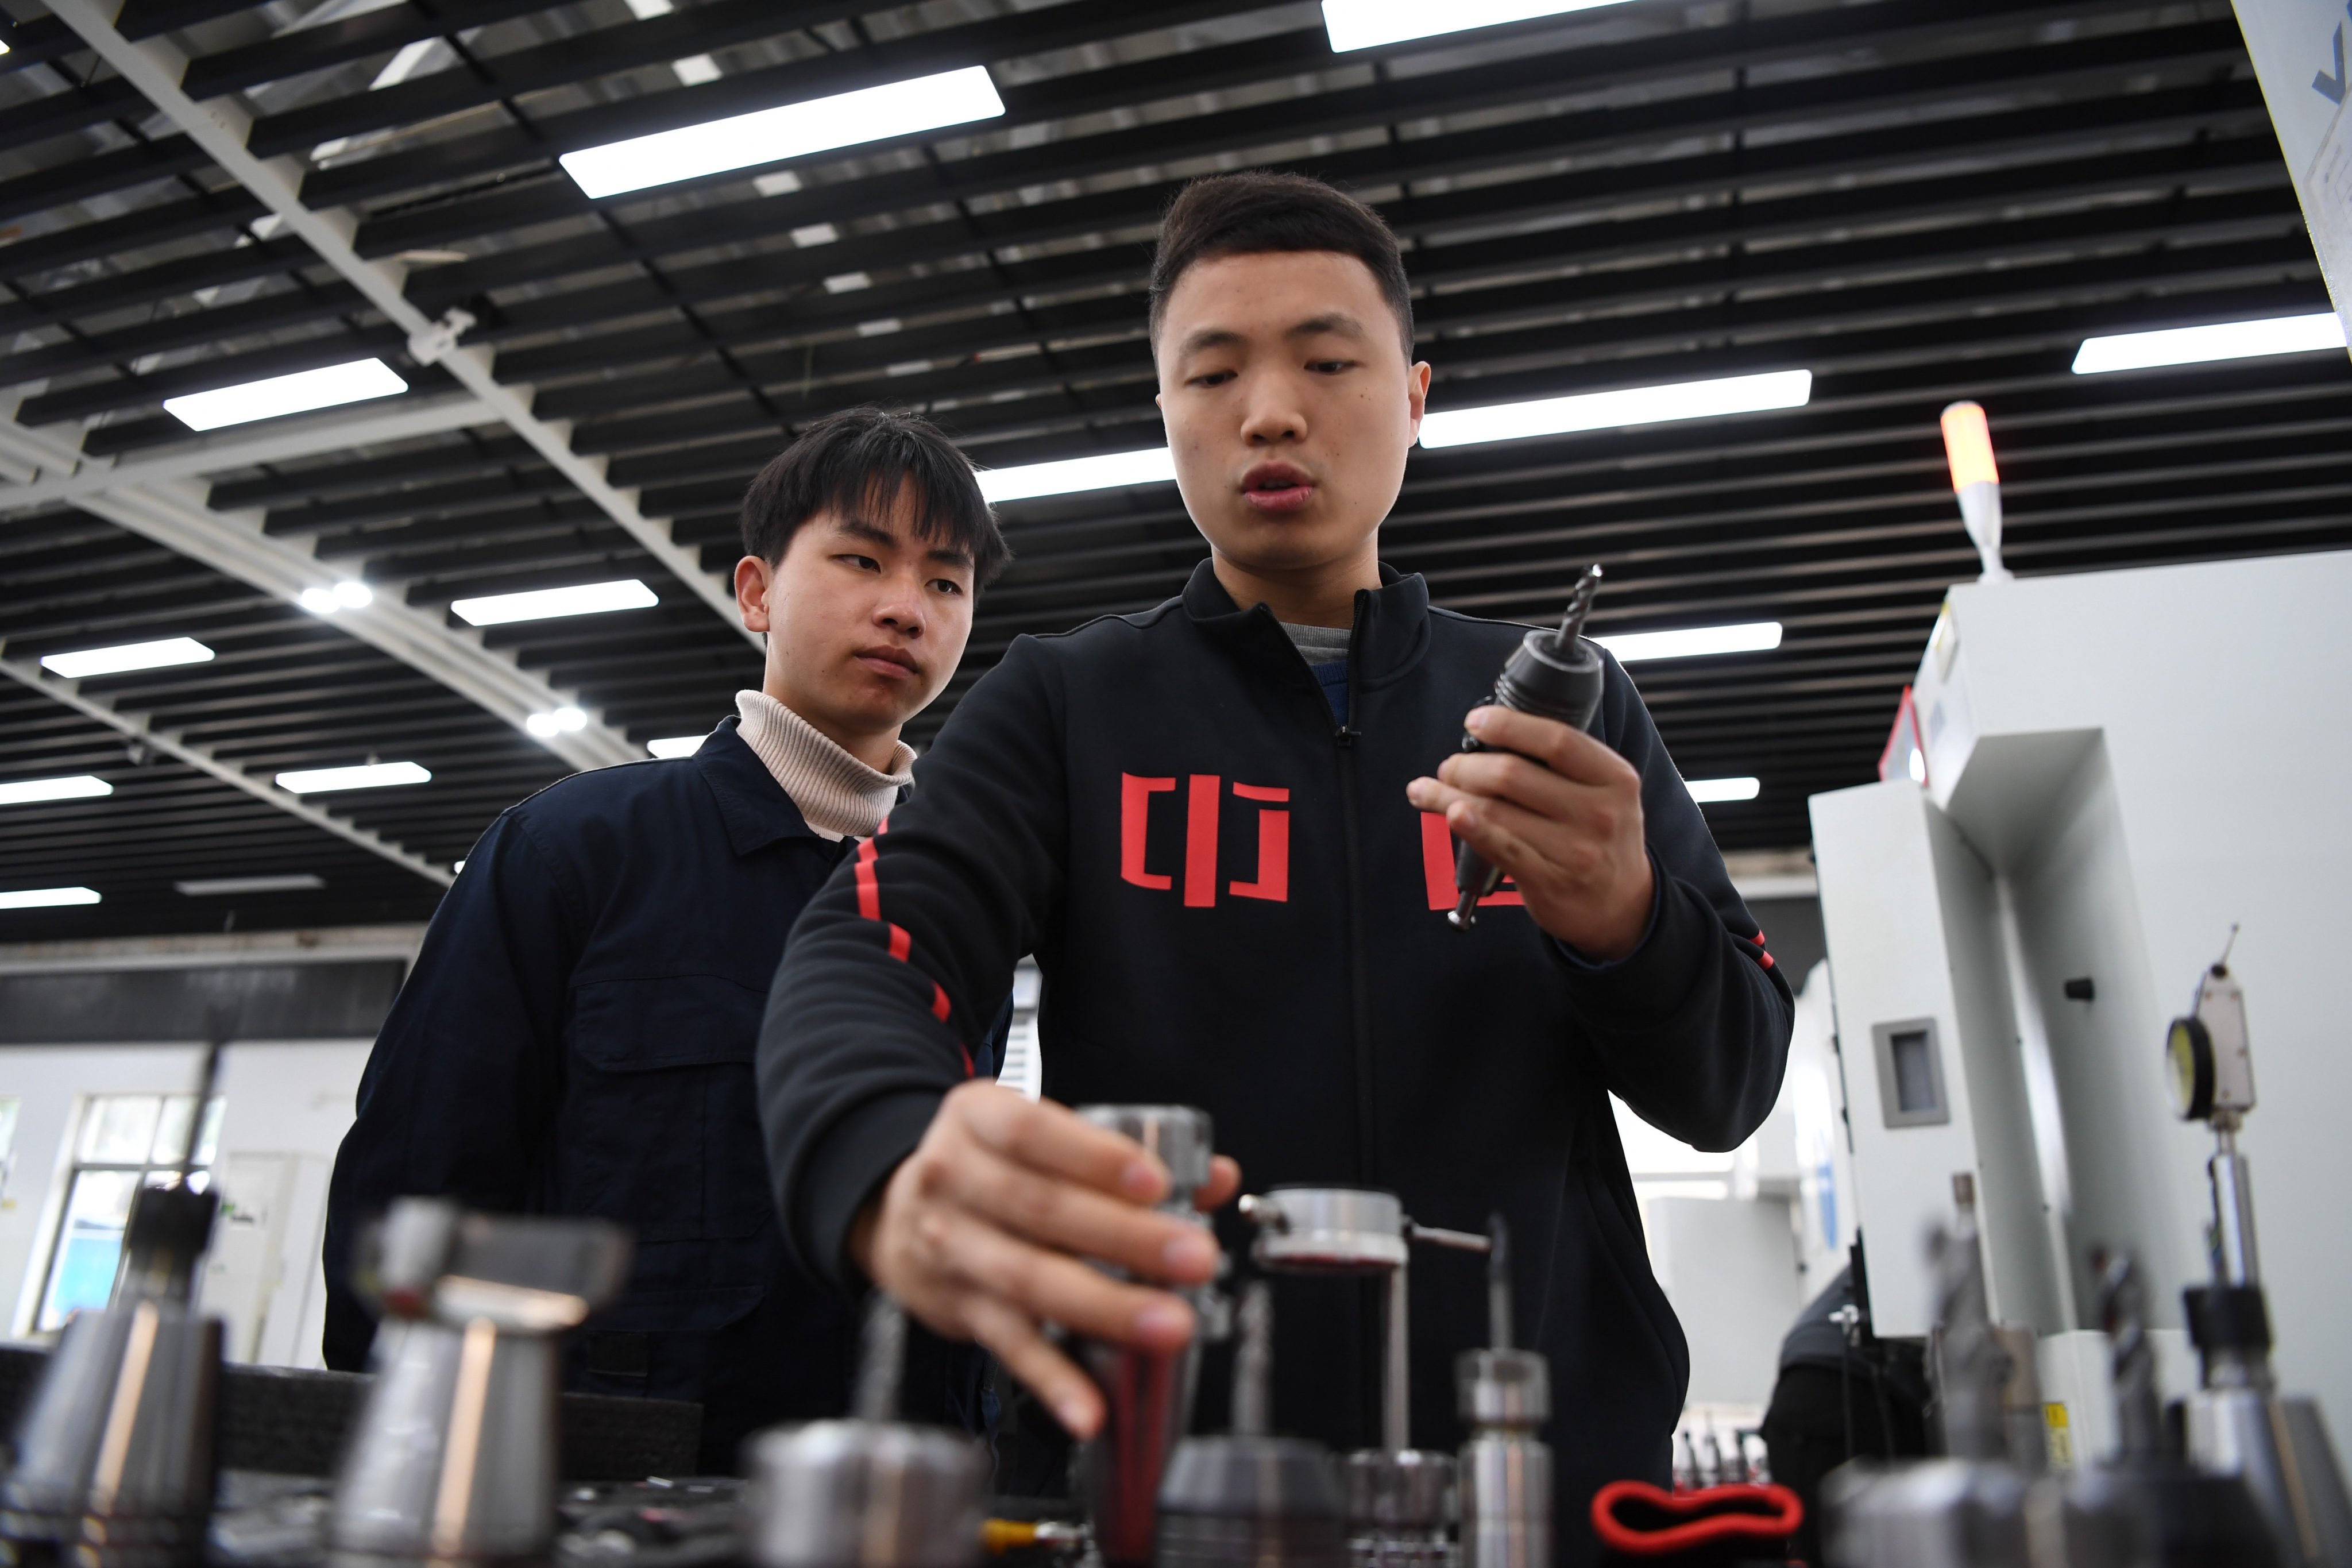 Vocational trainer Yang Denghui (right) explains the differences of various cutter heads to a student at Guangdong Machinery Technician College in Guangzhou on February 14. Vocational schools are still regarded by many in China as a place only for students who fail the country’s academic-track high school entry exam, potentially holding back the country’s technological progress. Photo: Xinhua